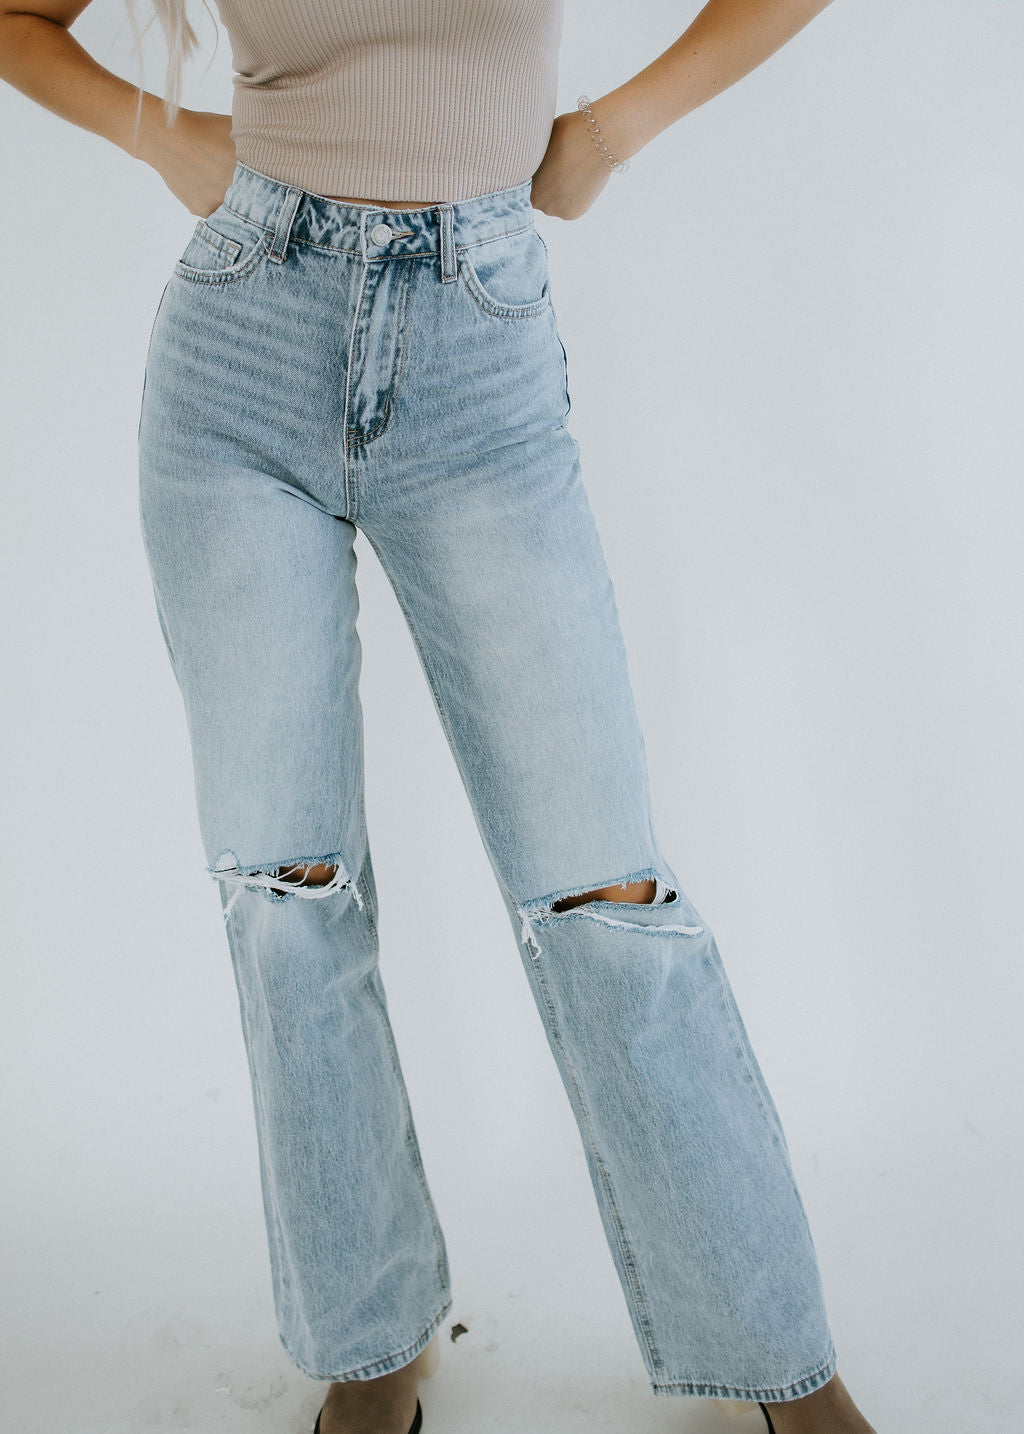 image of Petra '90s Vintage Flare Jean